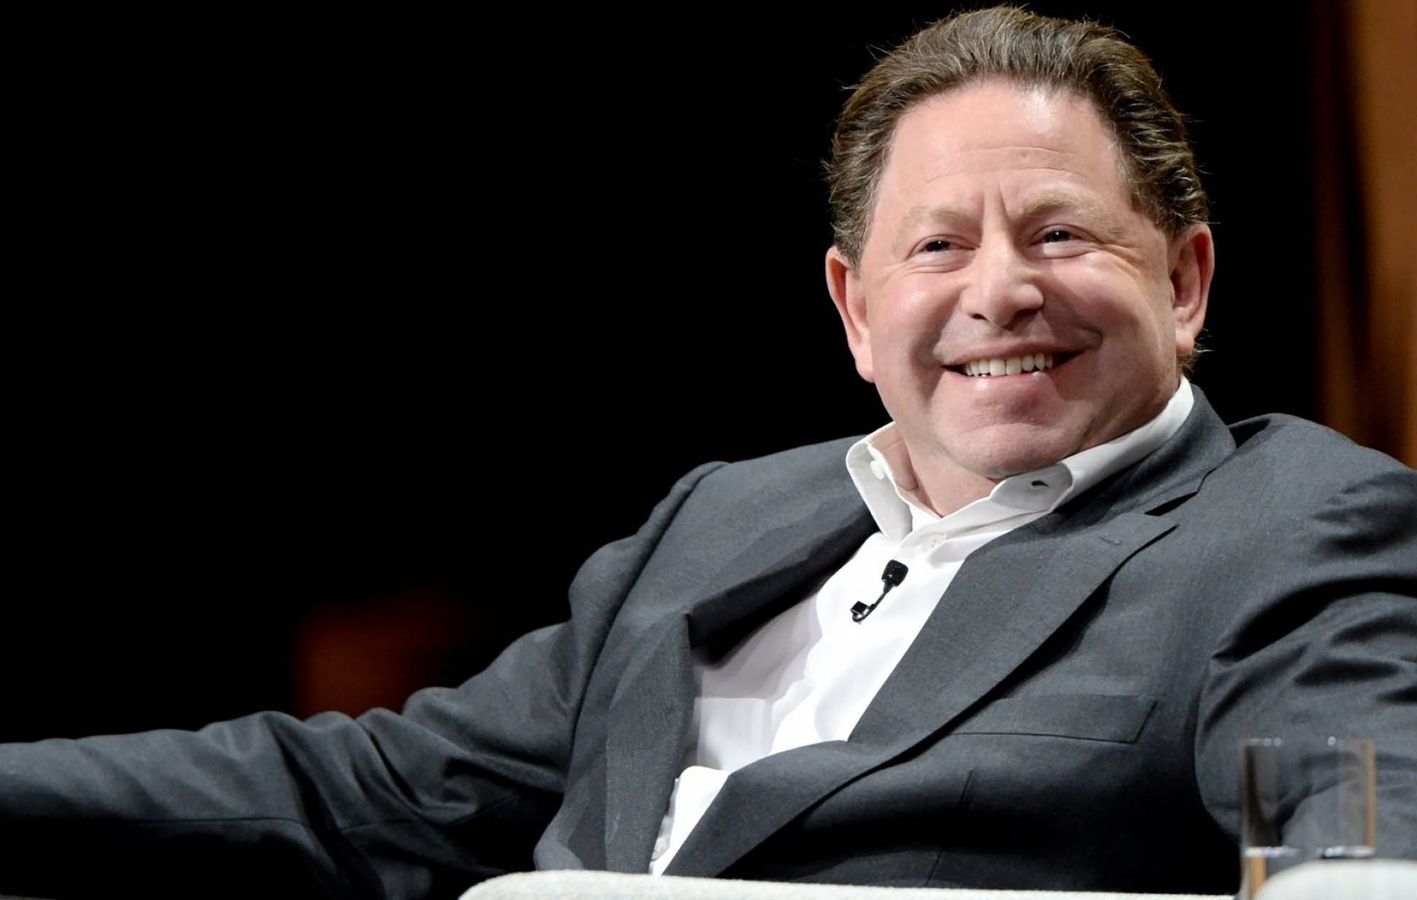 Bobby Kotick, Activision Blizzard's CEO, wearing a grey suit and sat down. Glass of water next to him on right side of image.